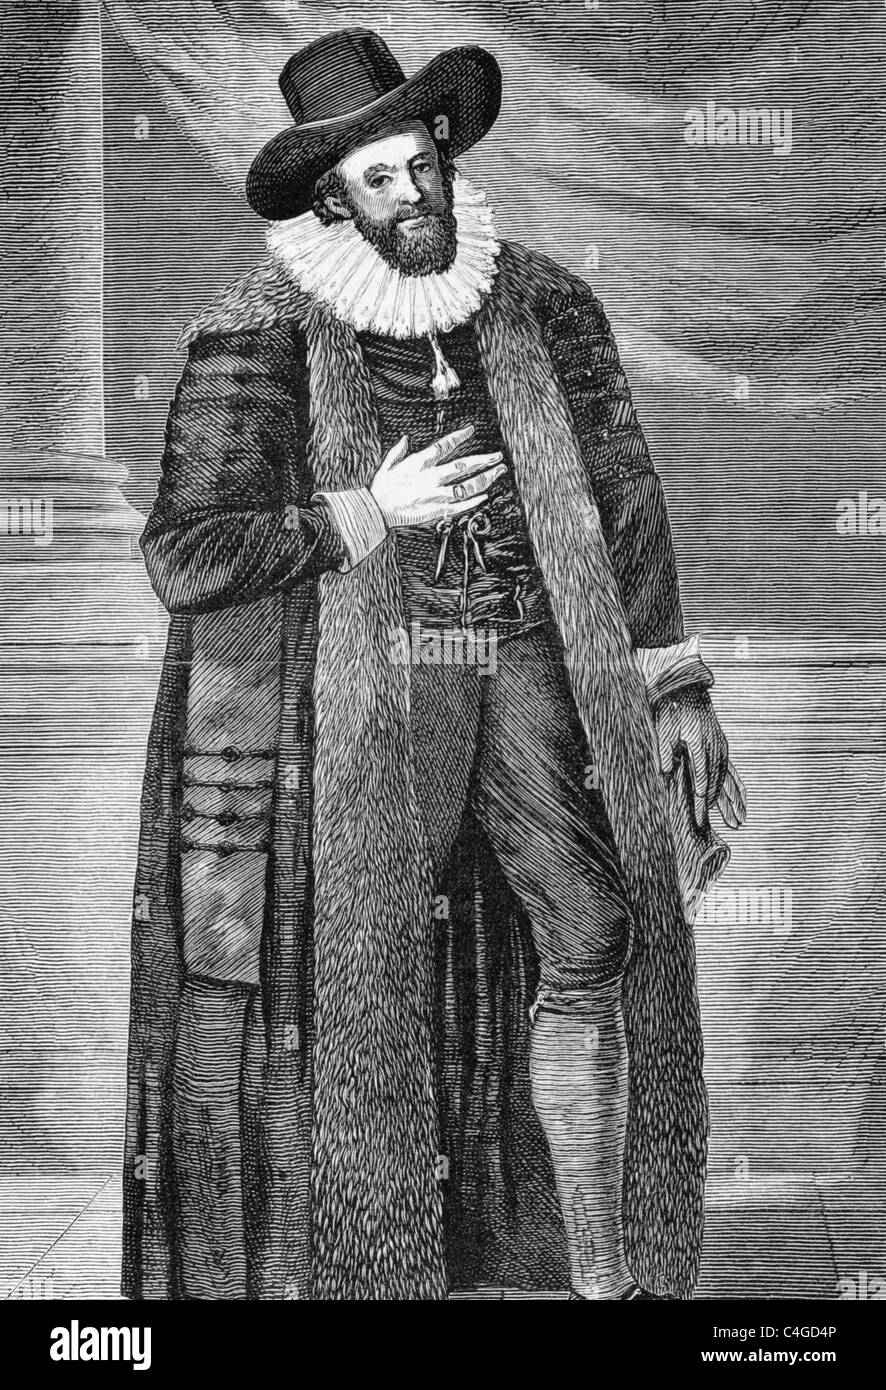 Edward Alleyn (1566-1626) on engraving from 1870. English actor who was a major figure of the Elizabethan theater. Stock Photo